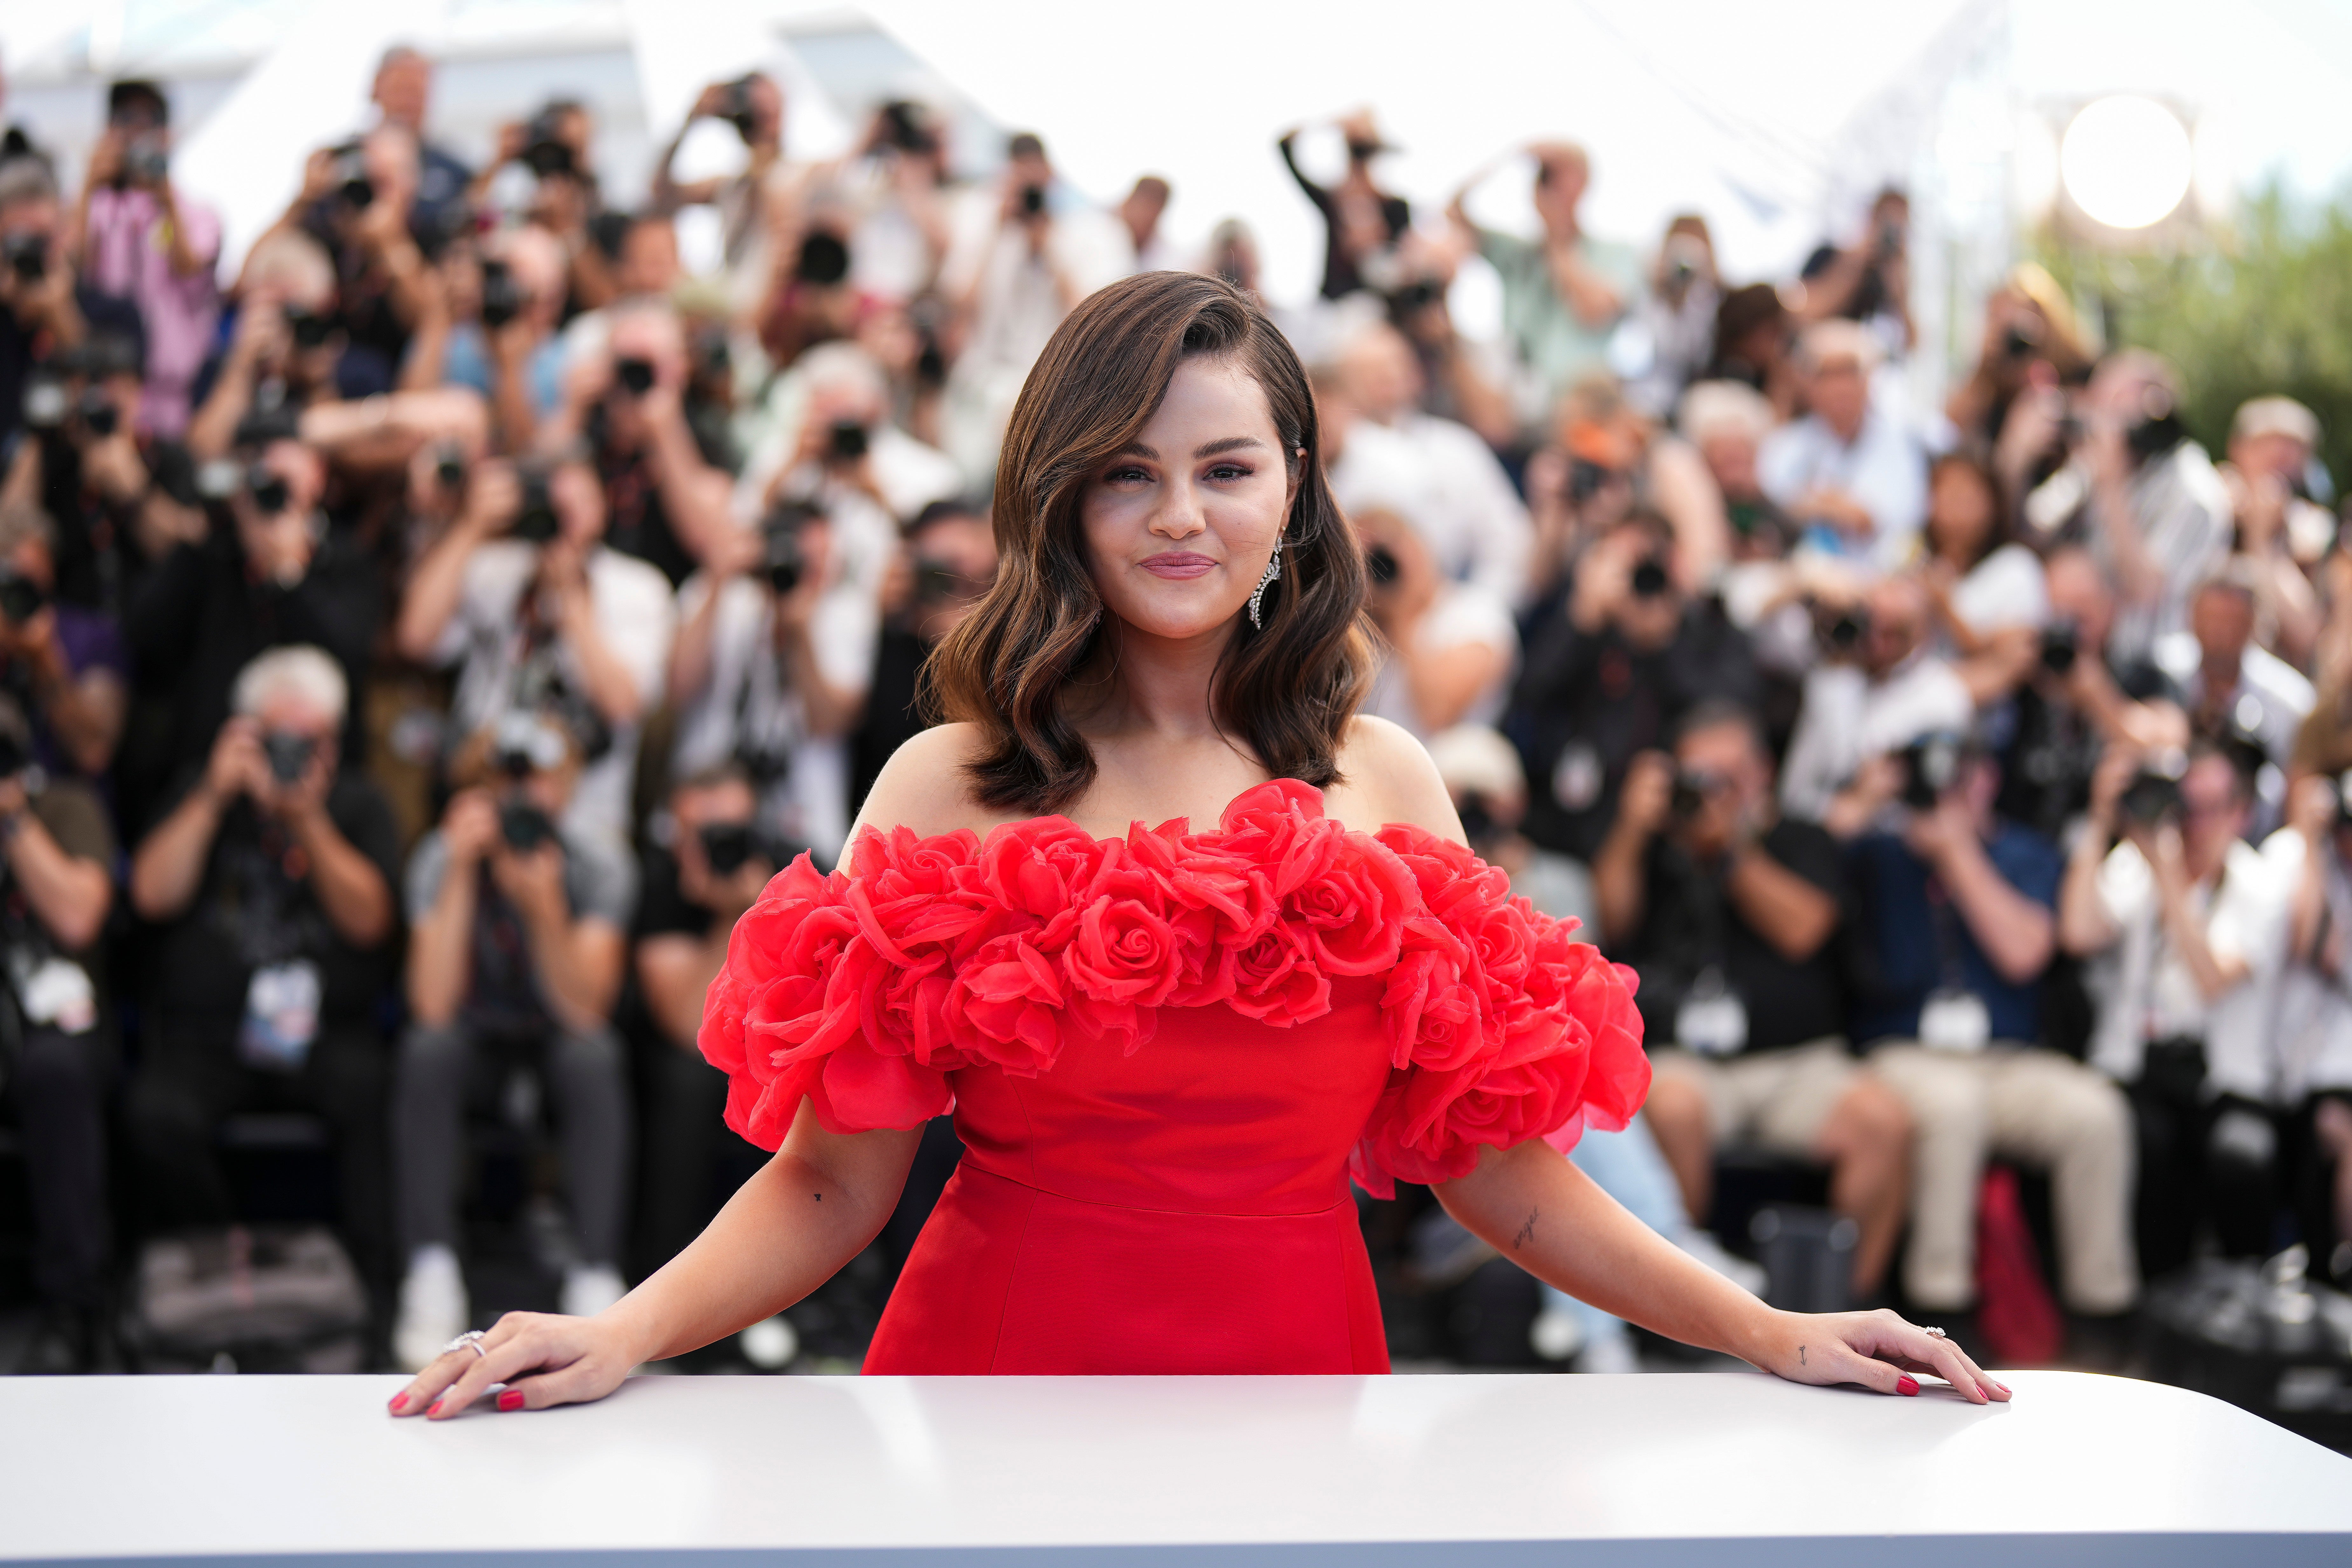 france, selena gomez, cannes, dheepan, sicario, zoe saldana, mexico city, palme d'or, the trans mexican drug lord musical compared to both ‘sicario’ and ‘mrs. doubtfire’ lights up cannes